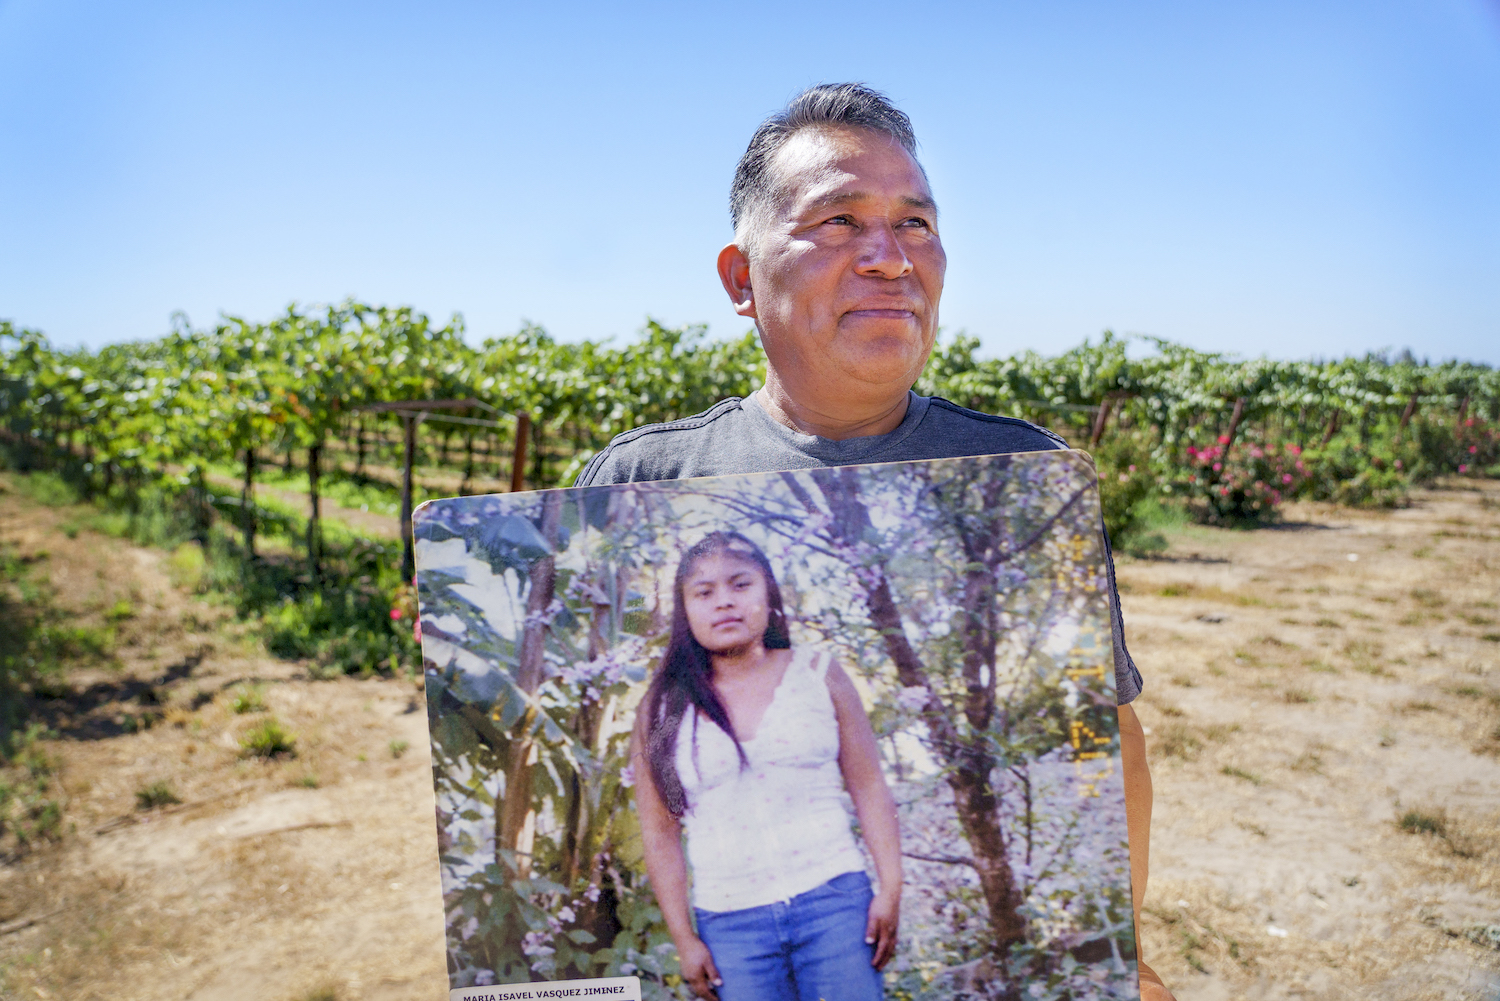 Doroteo Jimenez, of Lodi, California, holds a photograph of his niece, Maria Jimenez, who died in 2008 while working in a grapevine for 9 hours without access to water. She was only 17 at the time and pregnant.